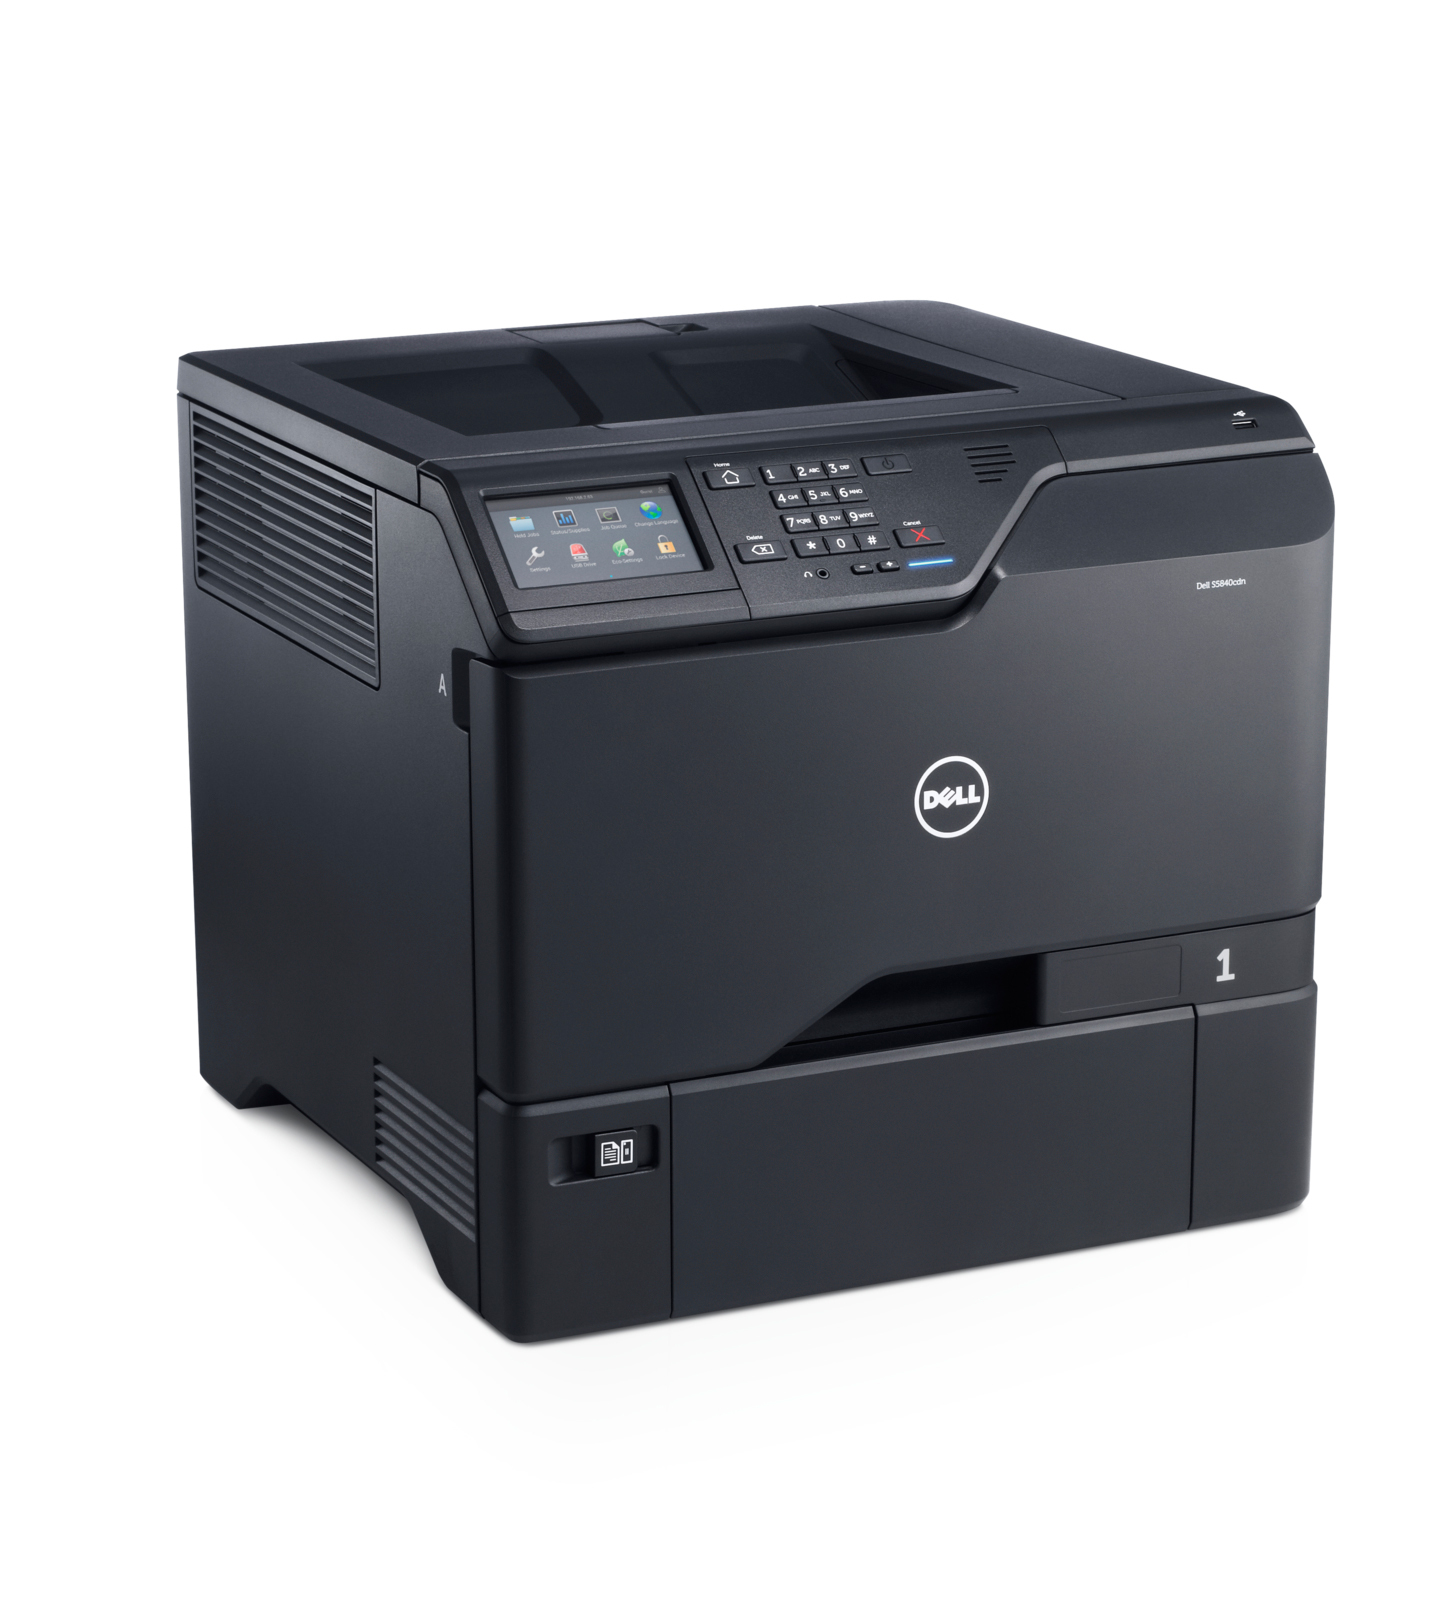 Dell Introduces Three New Smart Printers, Including World's Fastest First Out Time Less Than $1,000 | Business Wire